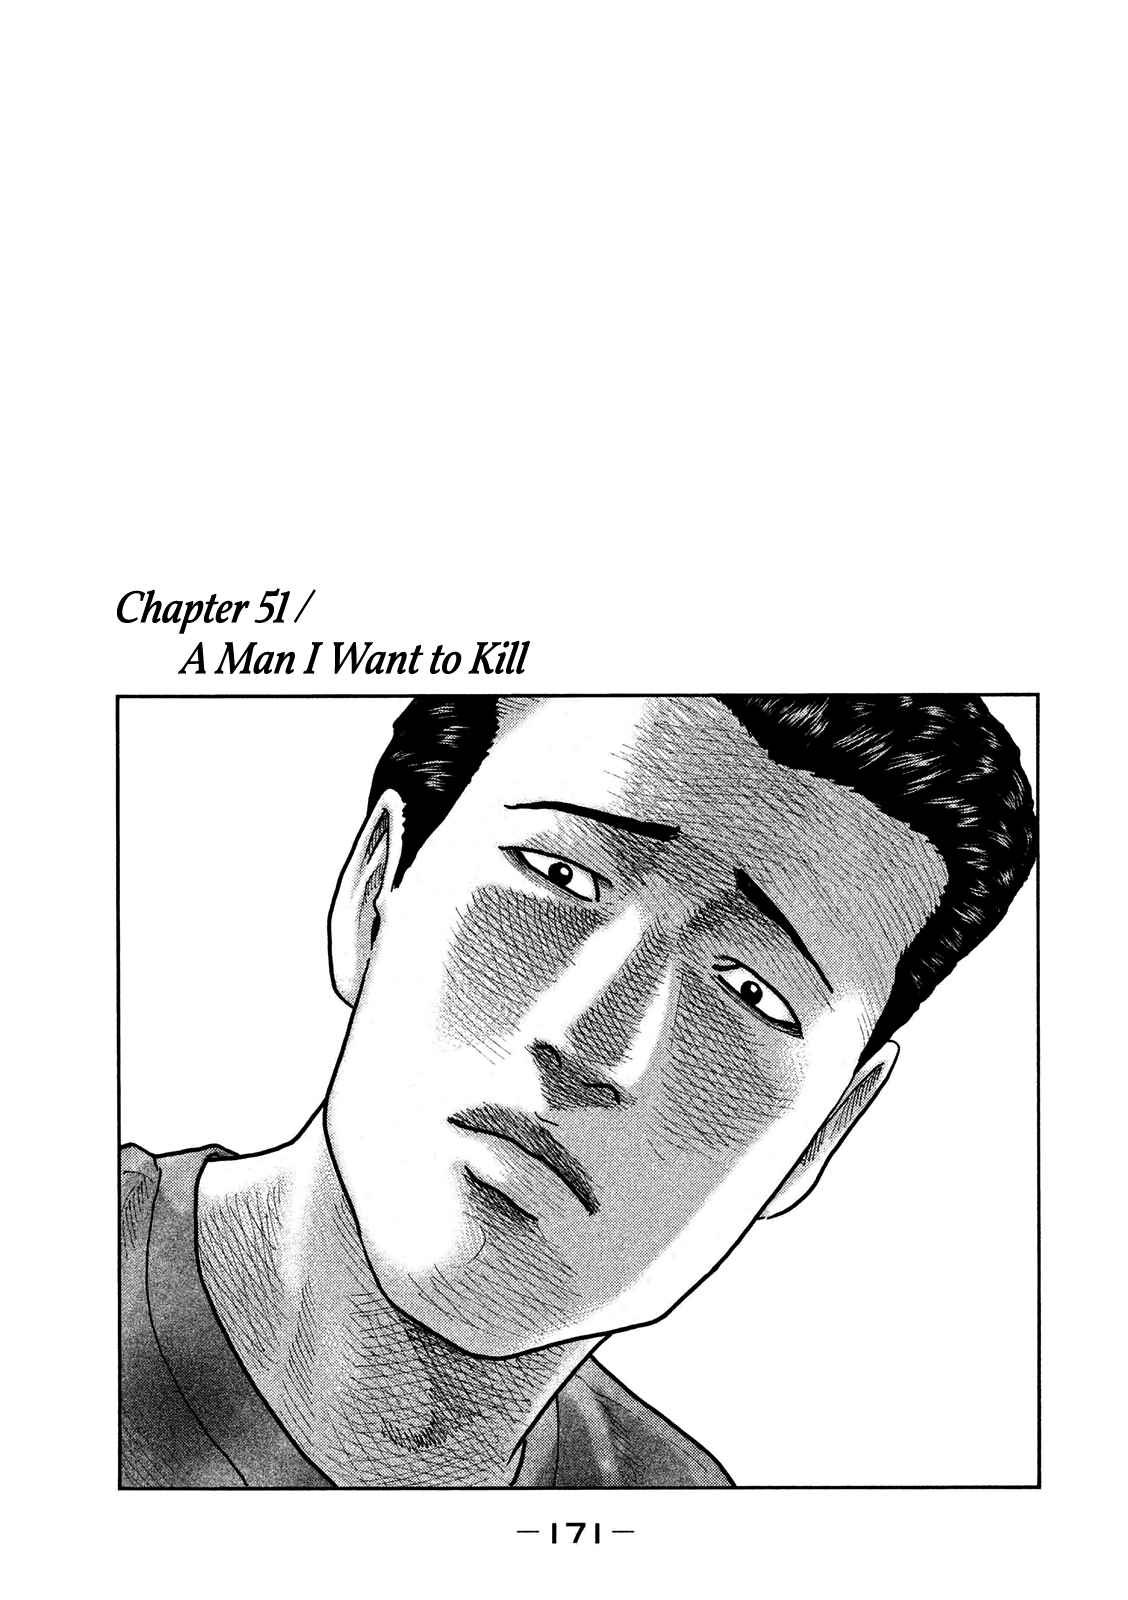 The Fable Vol. 5 Ch. 51 A Man I Want To Kill